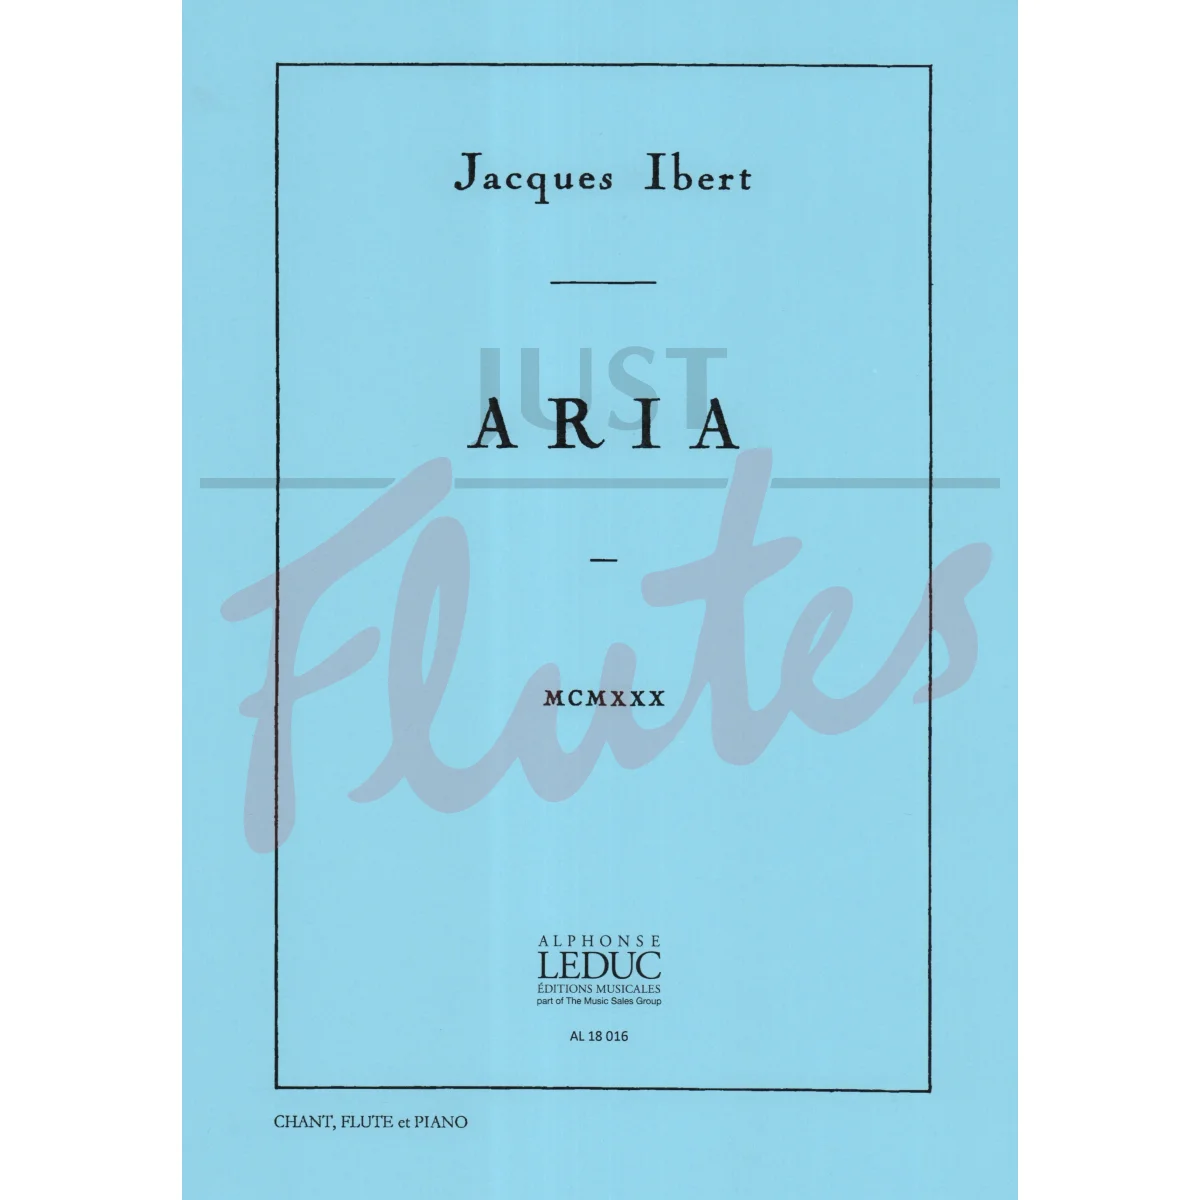 Aria for Flute, Voice and Piano